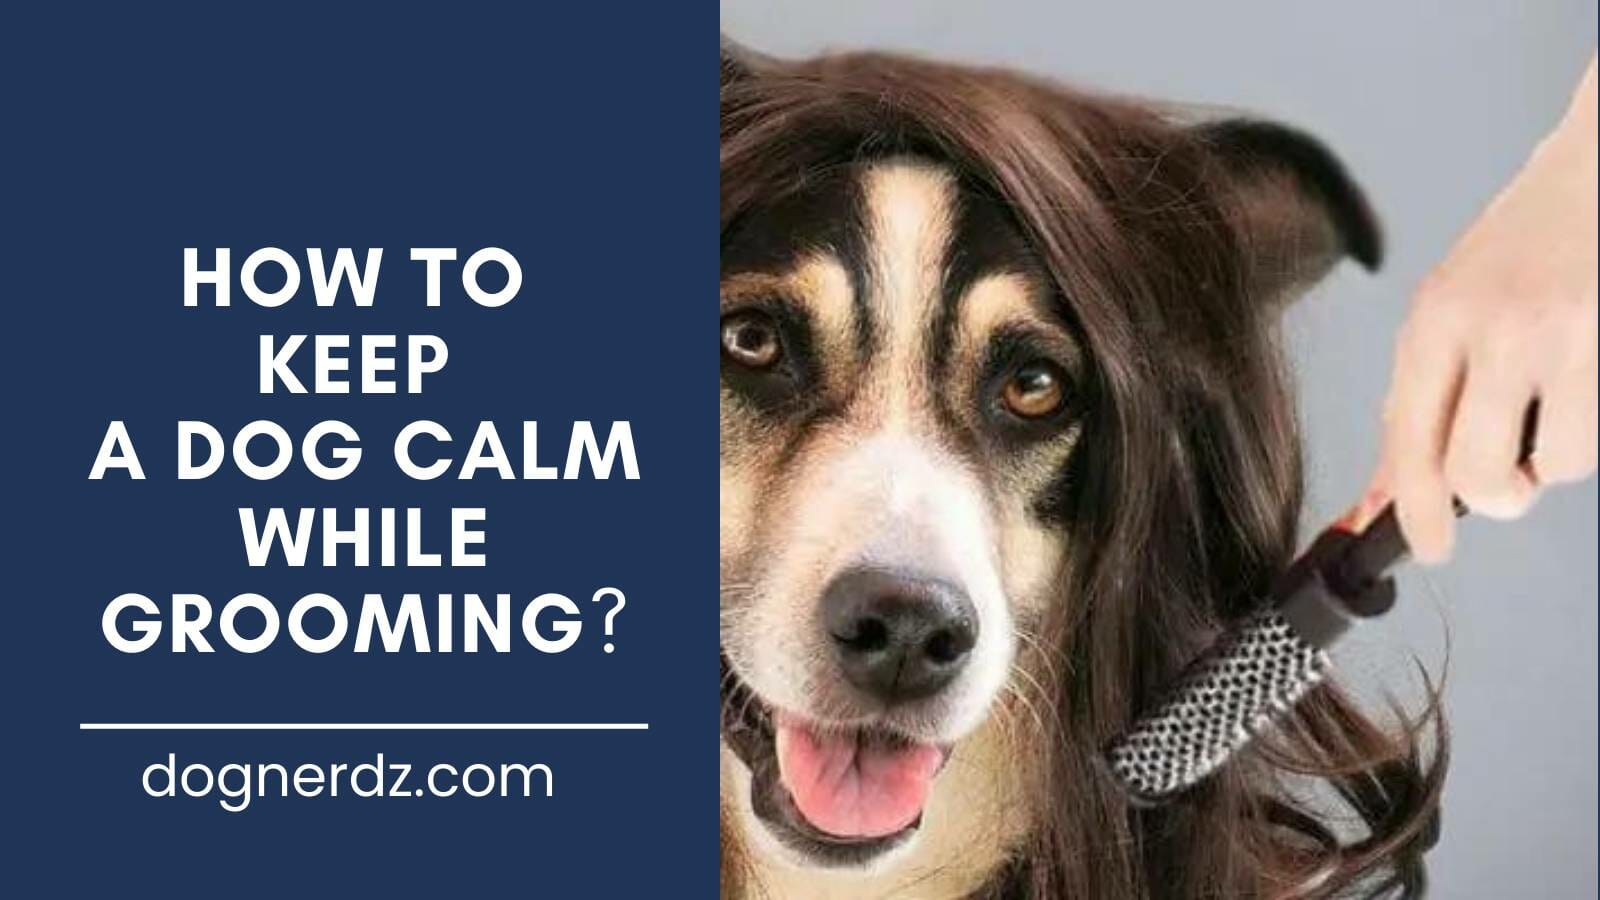 guide on how to keep a dog calm while grooming